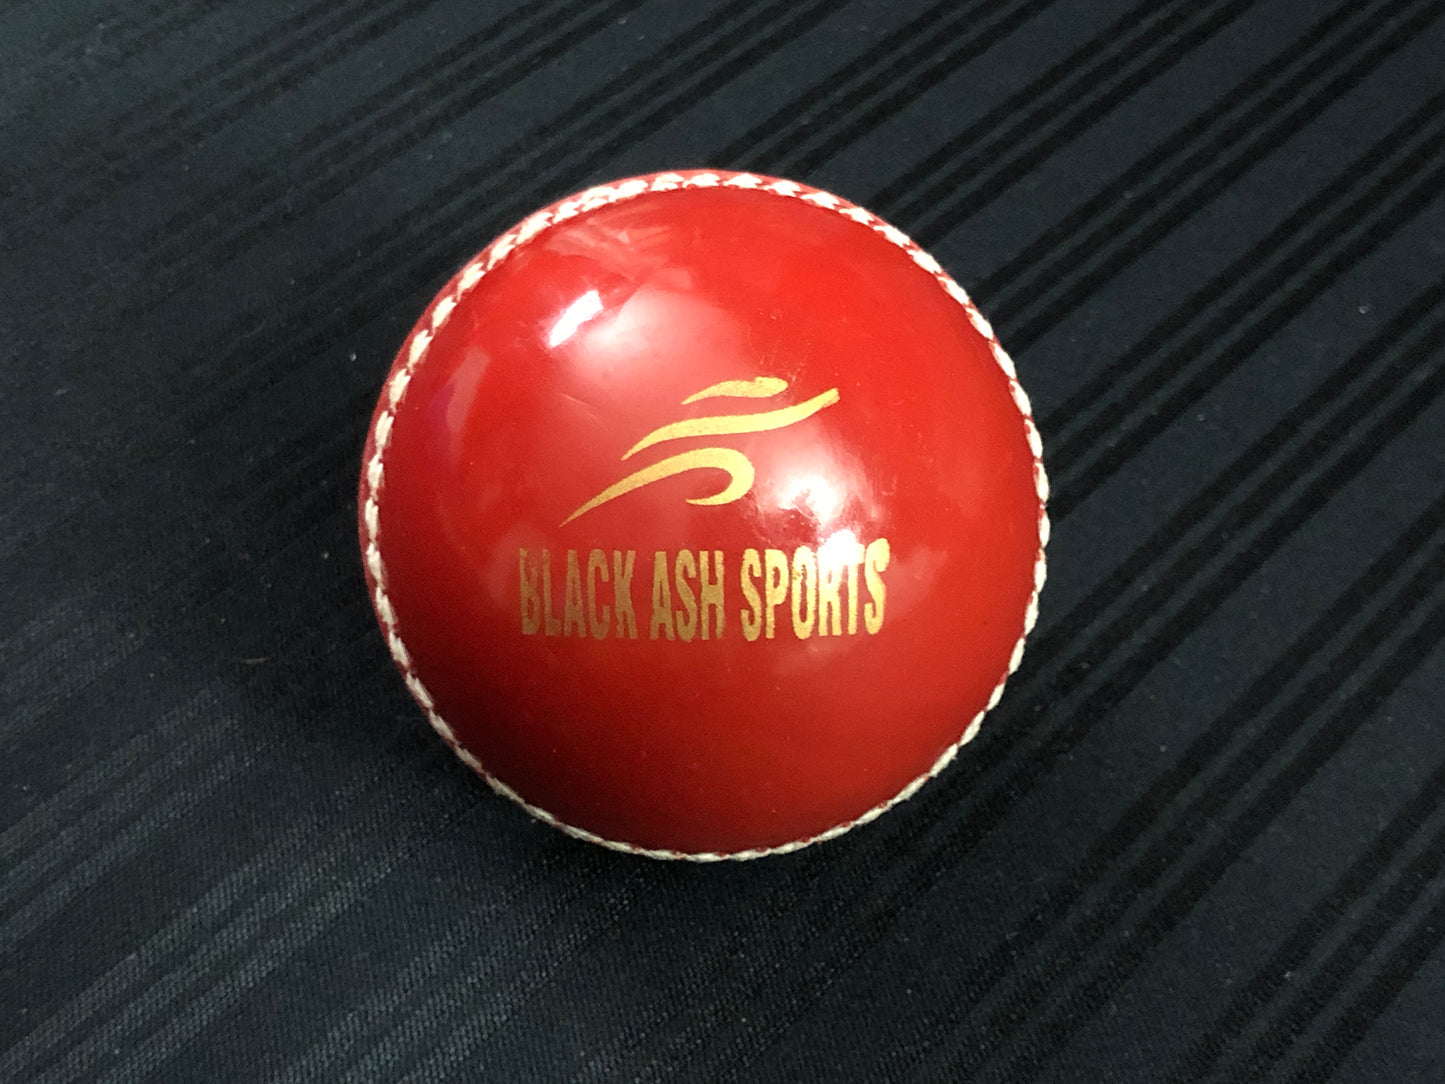 Pack of 6 Black Ash soft cricket training balls in red color, each weighing 90 grams, made of top-quality PVC with a soft center inside. Recommended for coaching and training purposes, suitable for both indoor and outdoor cricket play.